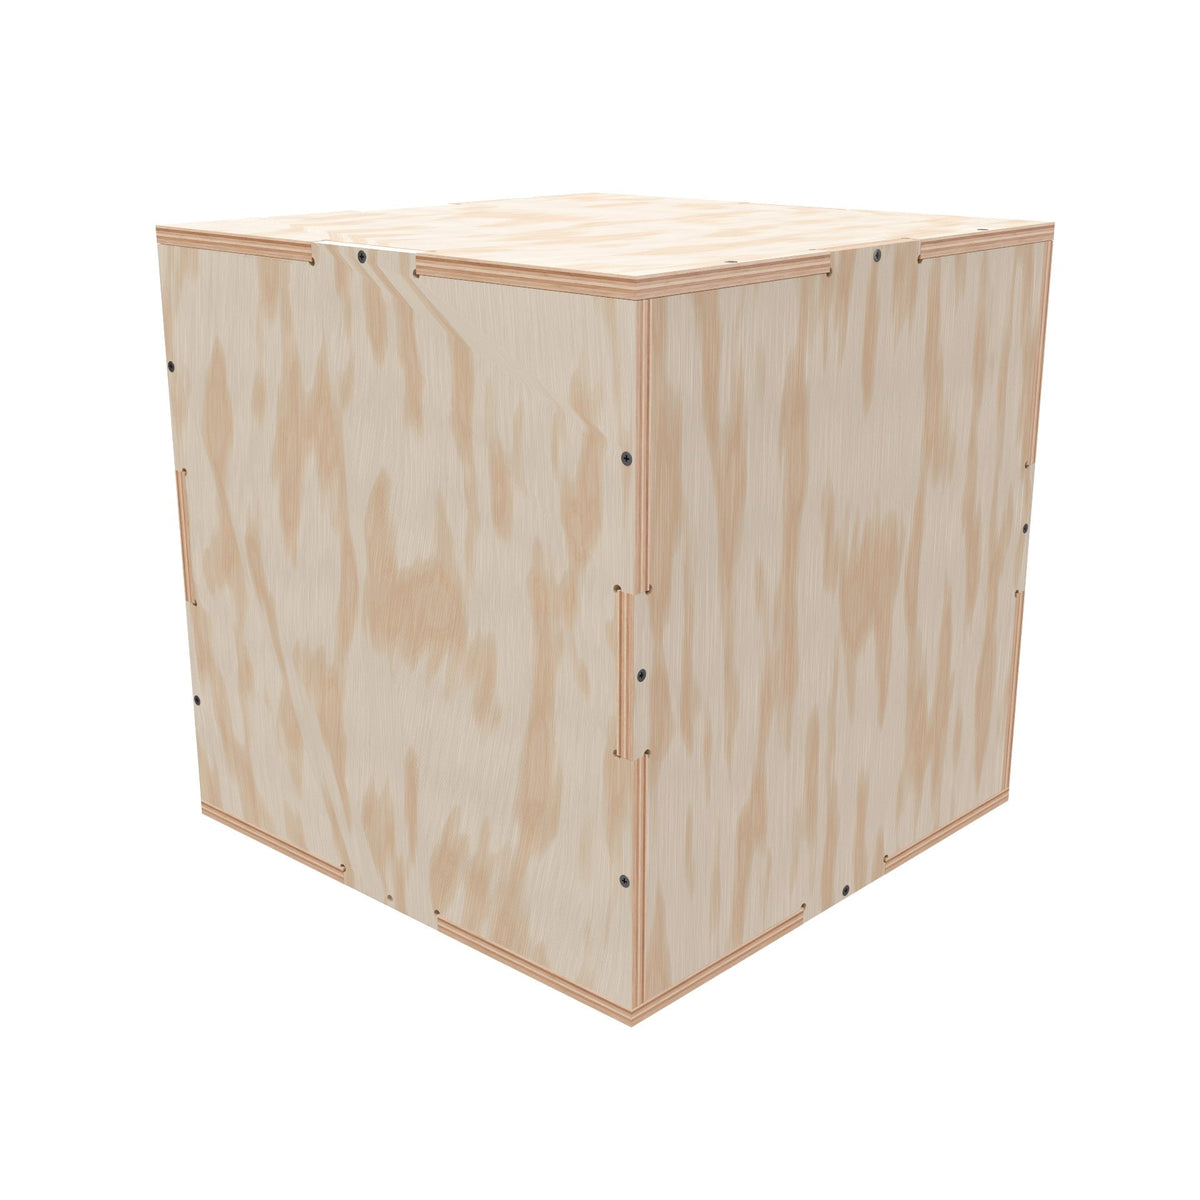 Plywood Shipping Crate 18x18x18